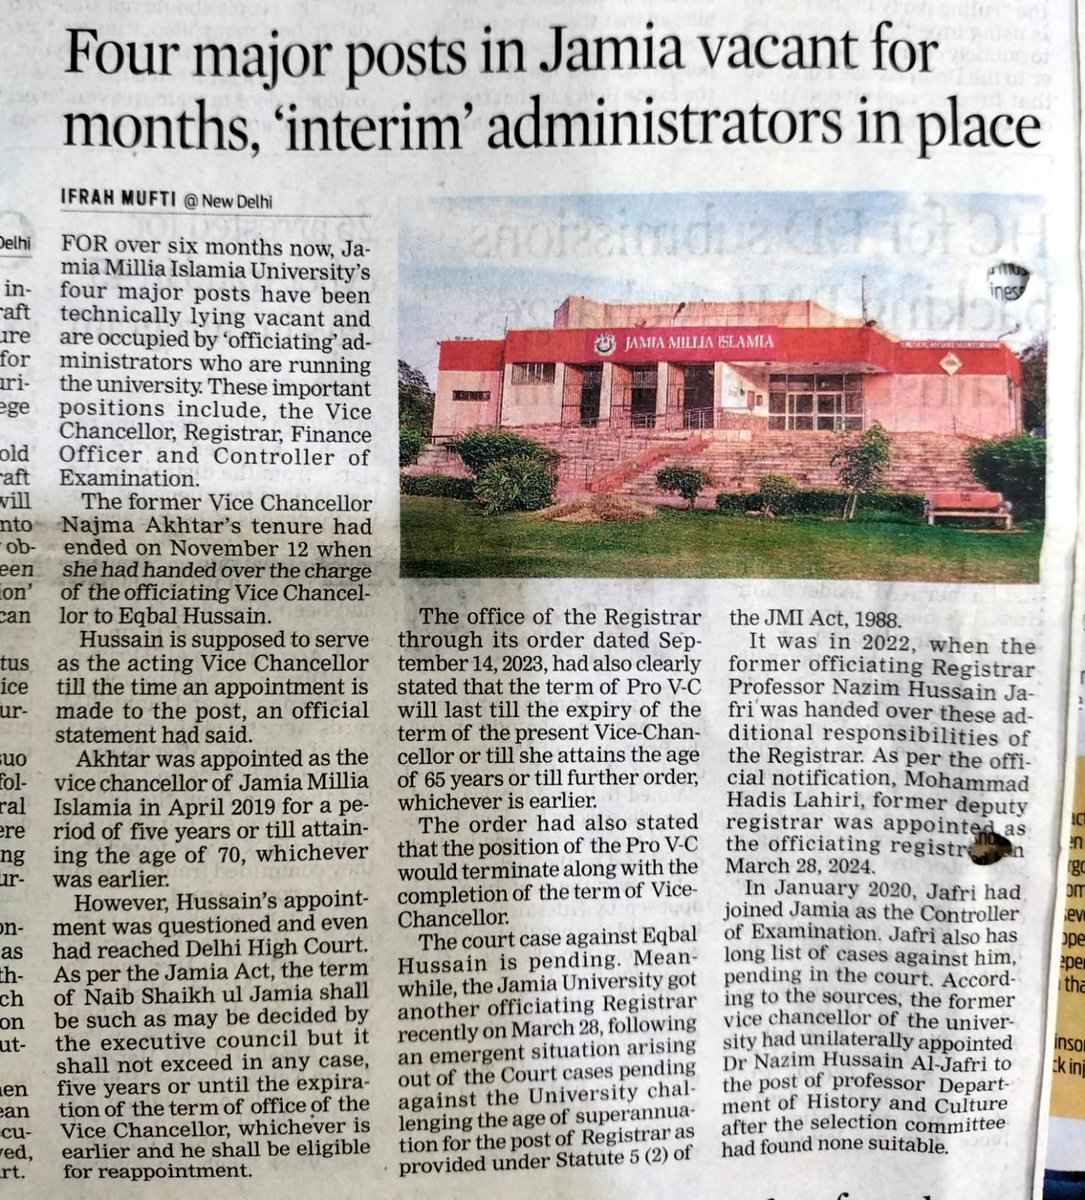 For over six months now,@jamiamillia_ four major posts have been lying vacant and are occupied by ‘officiating’ administrators. These important positions include, the Vice Chancellor, Registrar, Finance Officer and Controller of Examination. I report @santwana99 @Shahid_Faridi_